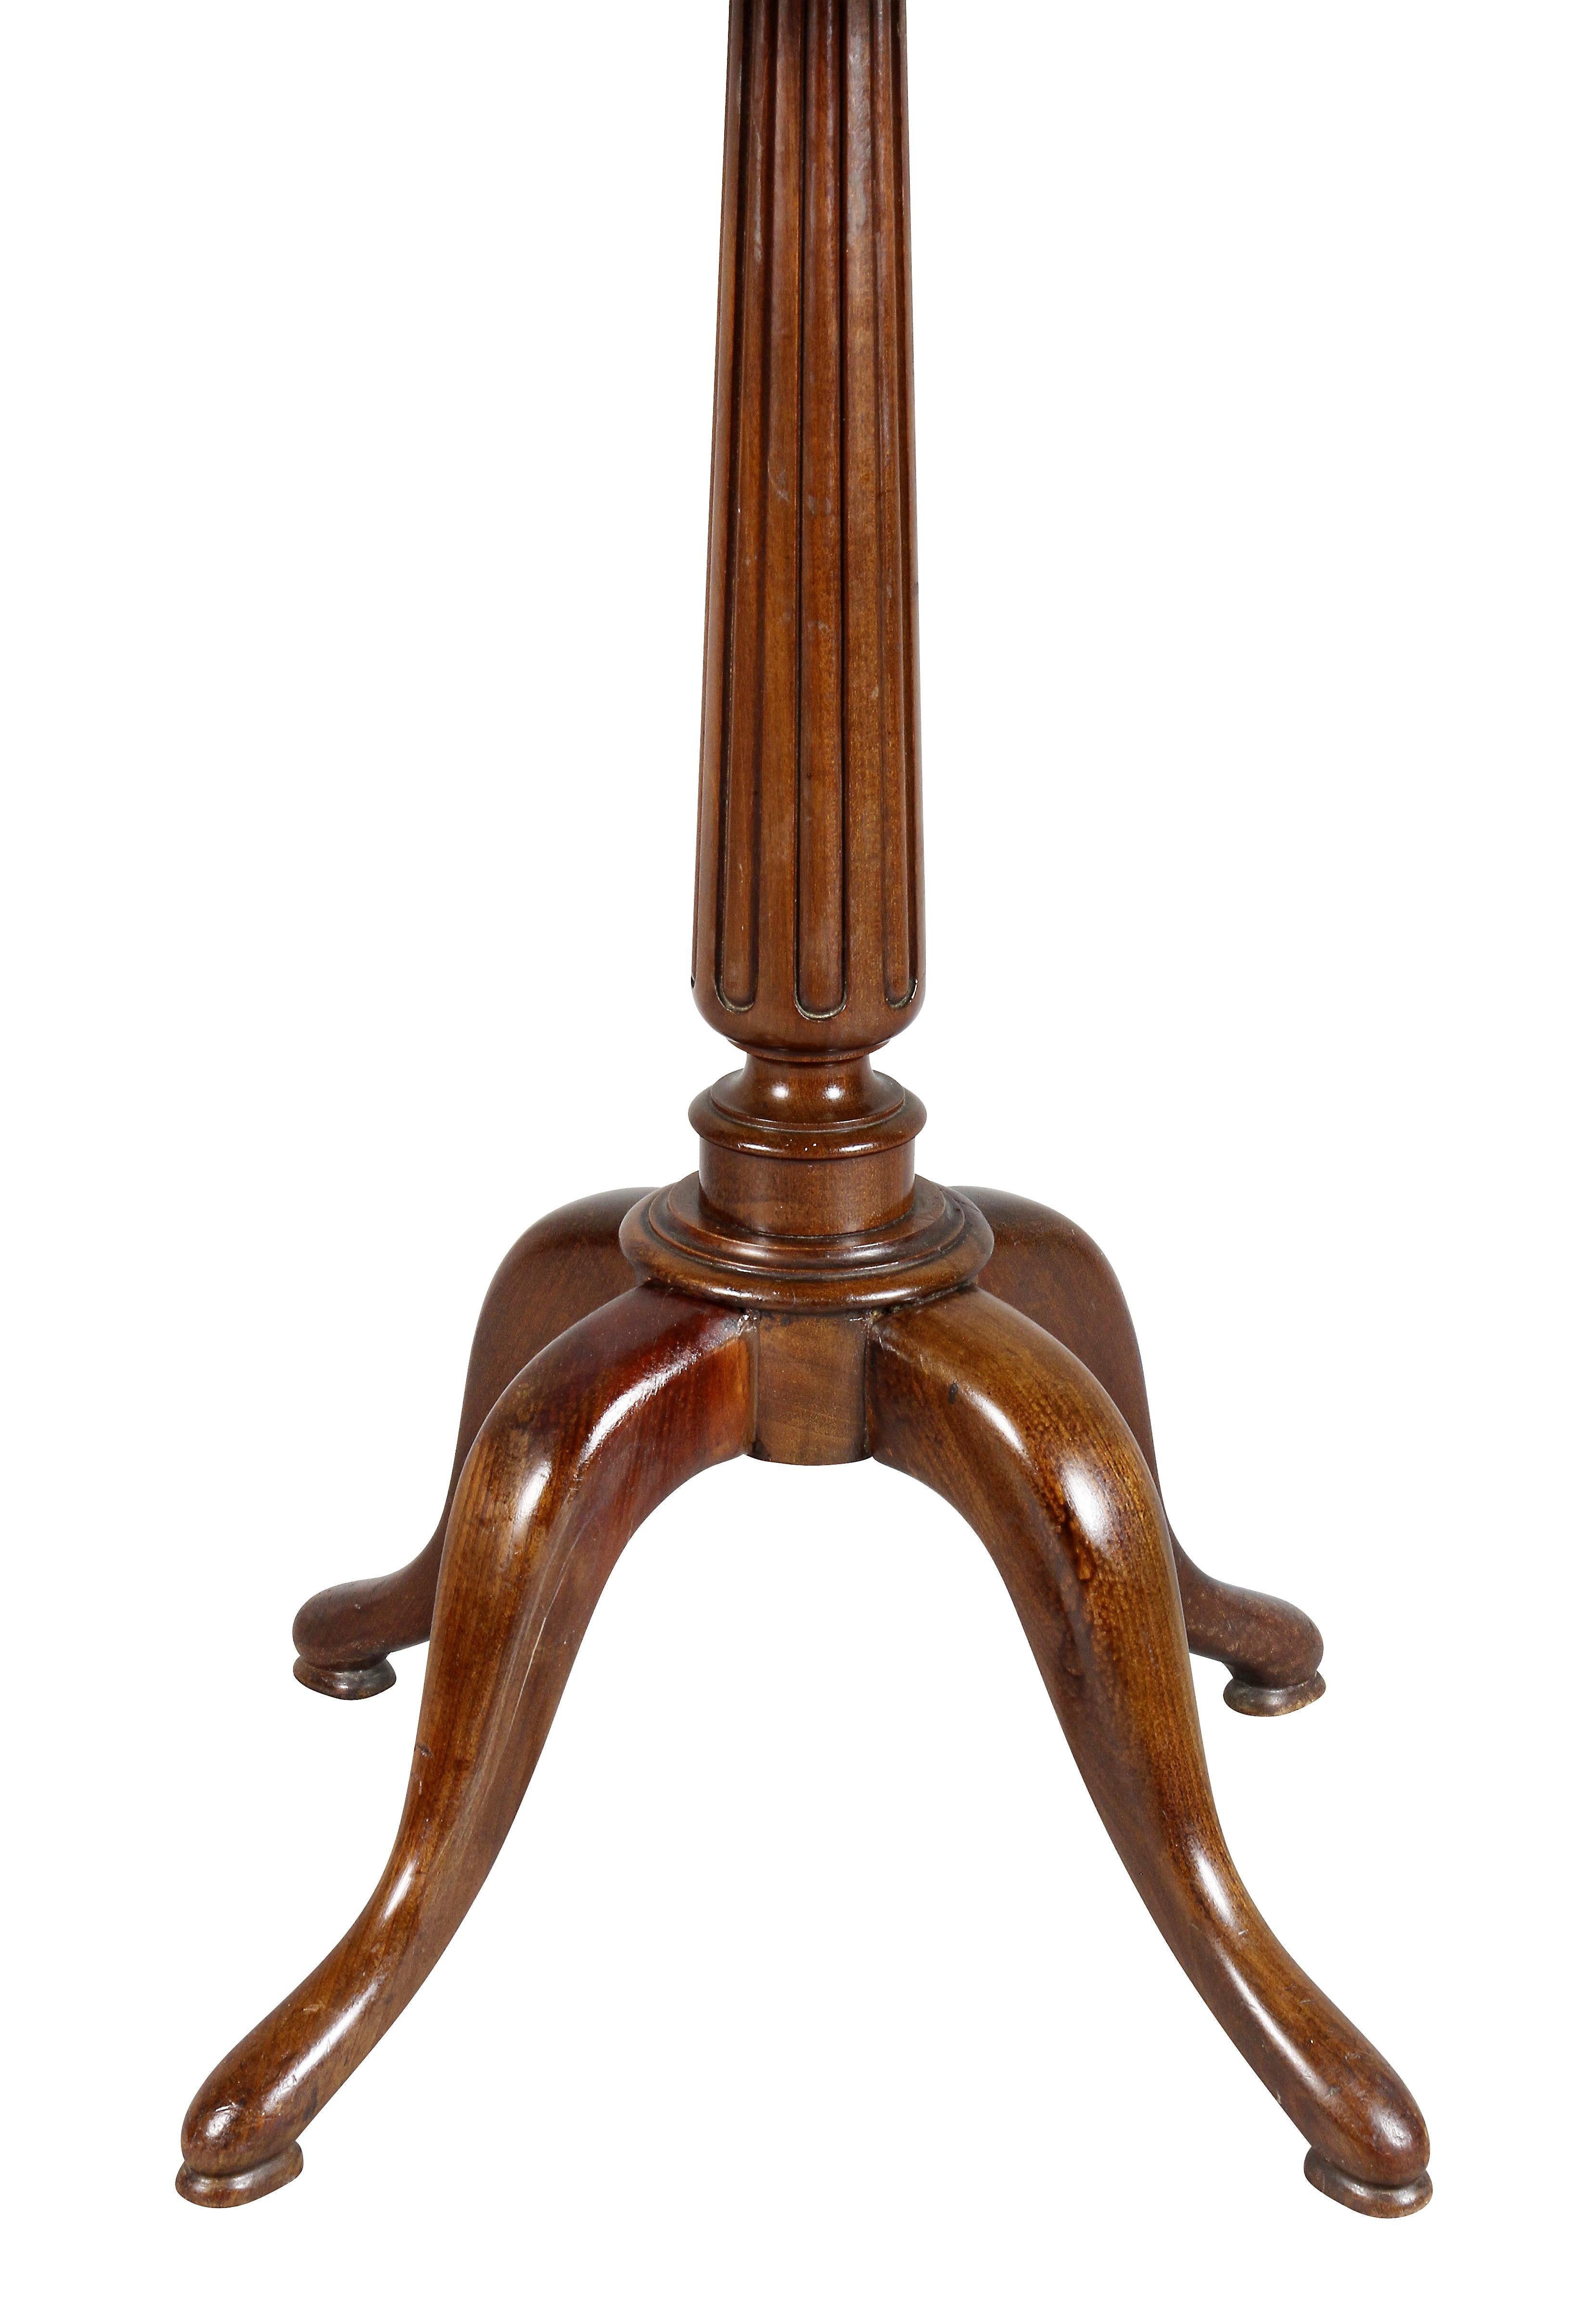 Louis XVI Style Mahogany Two-Tier Stand by Escalier De Christa 1